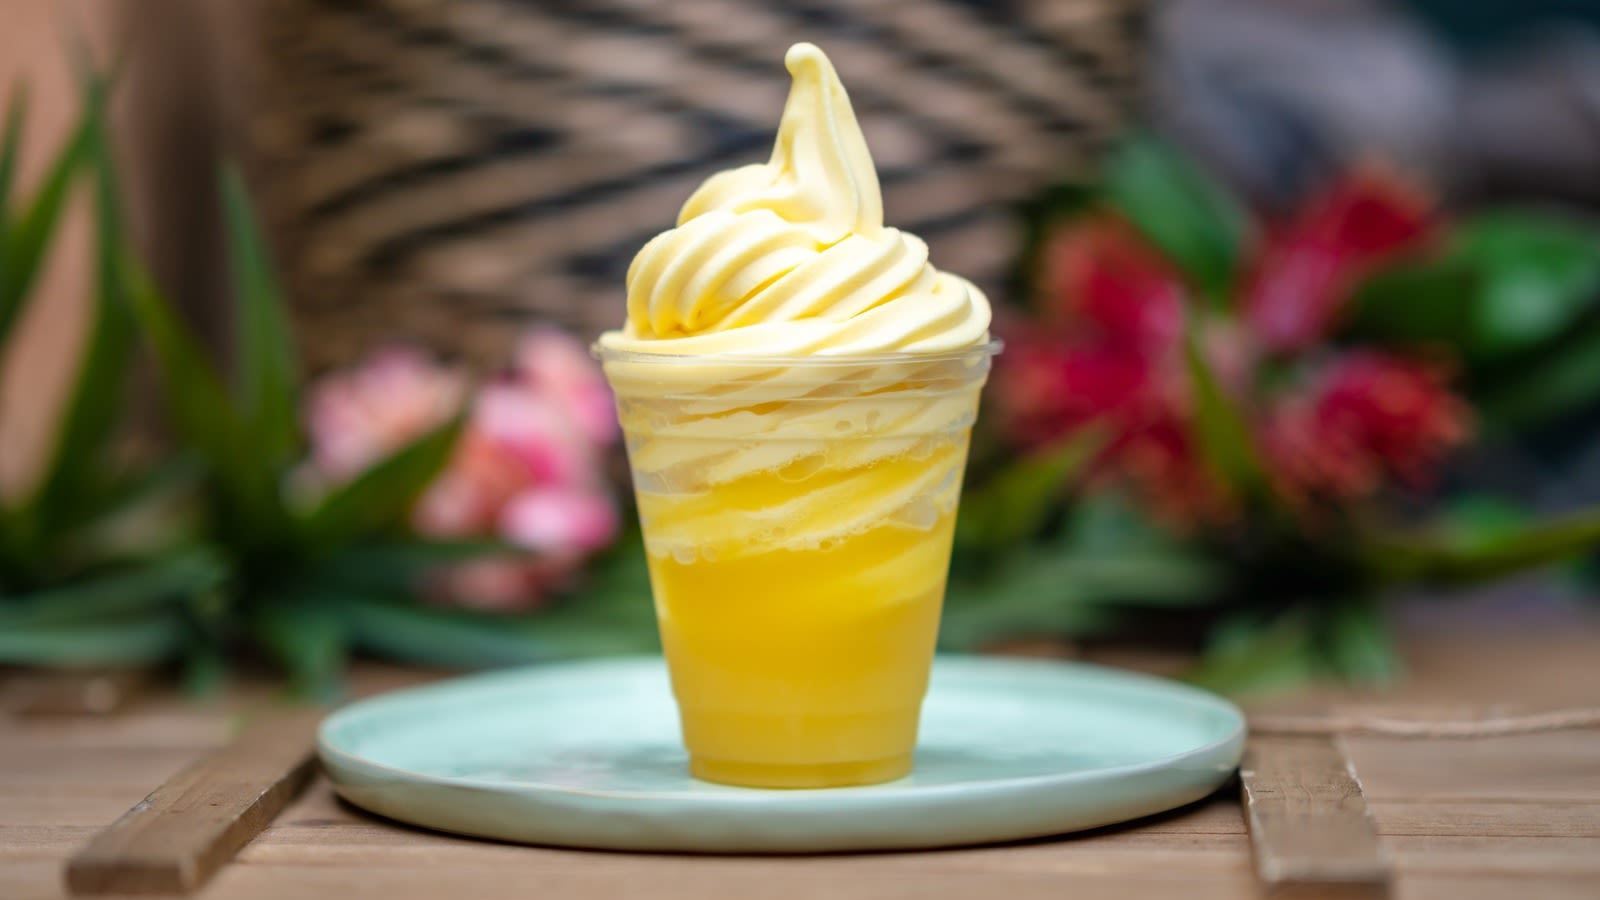 When Did Disney Introduce Dole Whip To Its Parks?